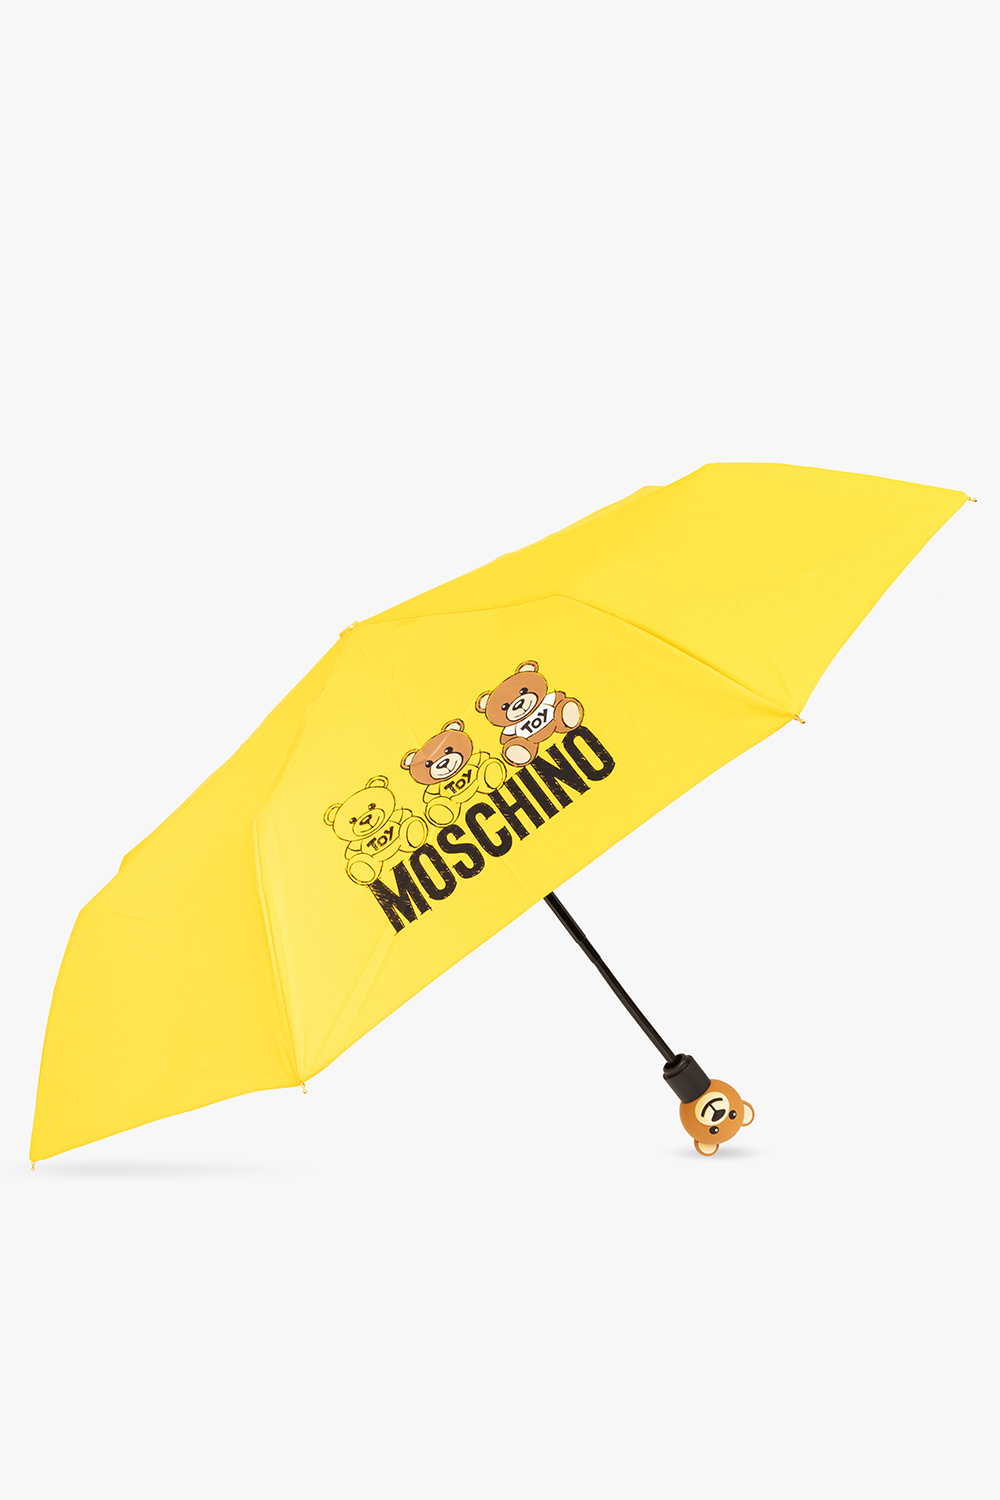 Moschino Frequently asked questions